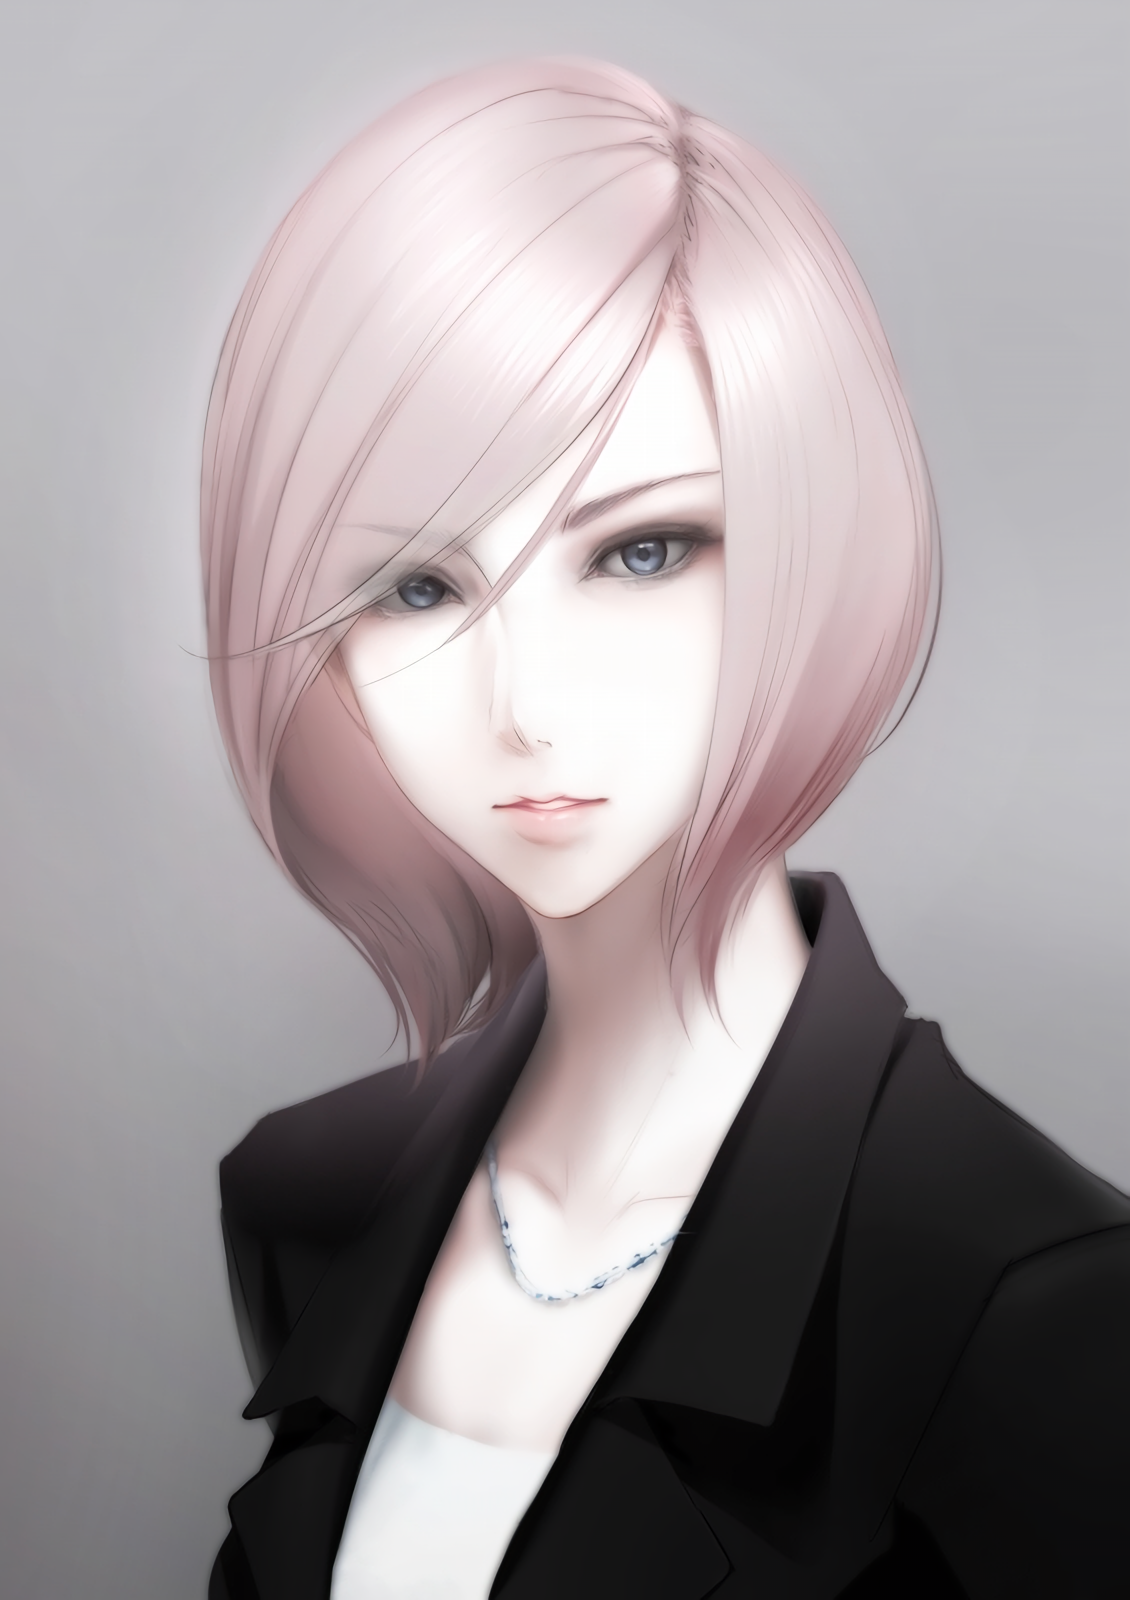 Anime Anime Girls Original Characters Business Suit Short Hair Gray Eyes Blonde 1130x1600